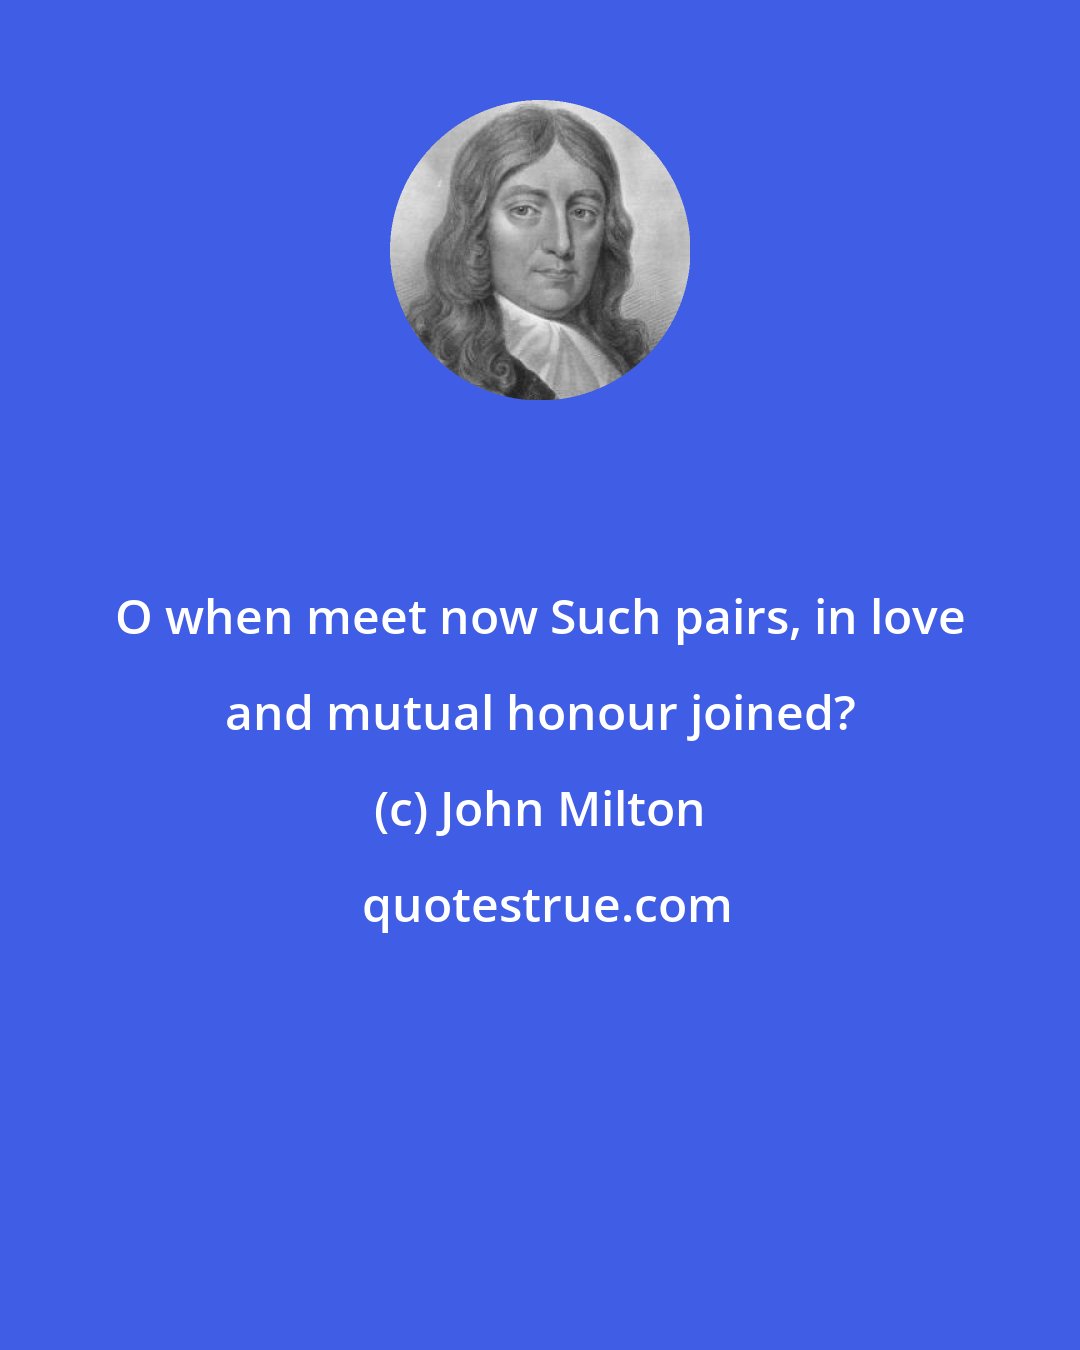 John Milton: O when meet now Such pairs, in love and mutual honour joined?